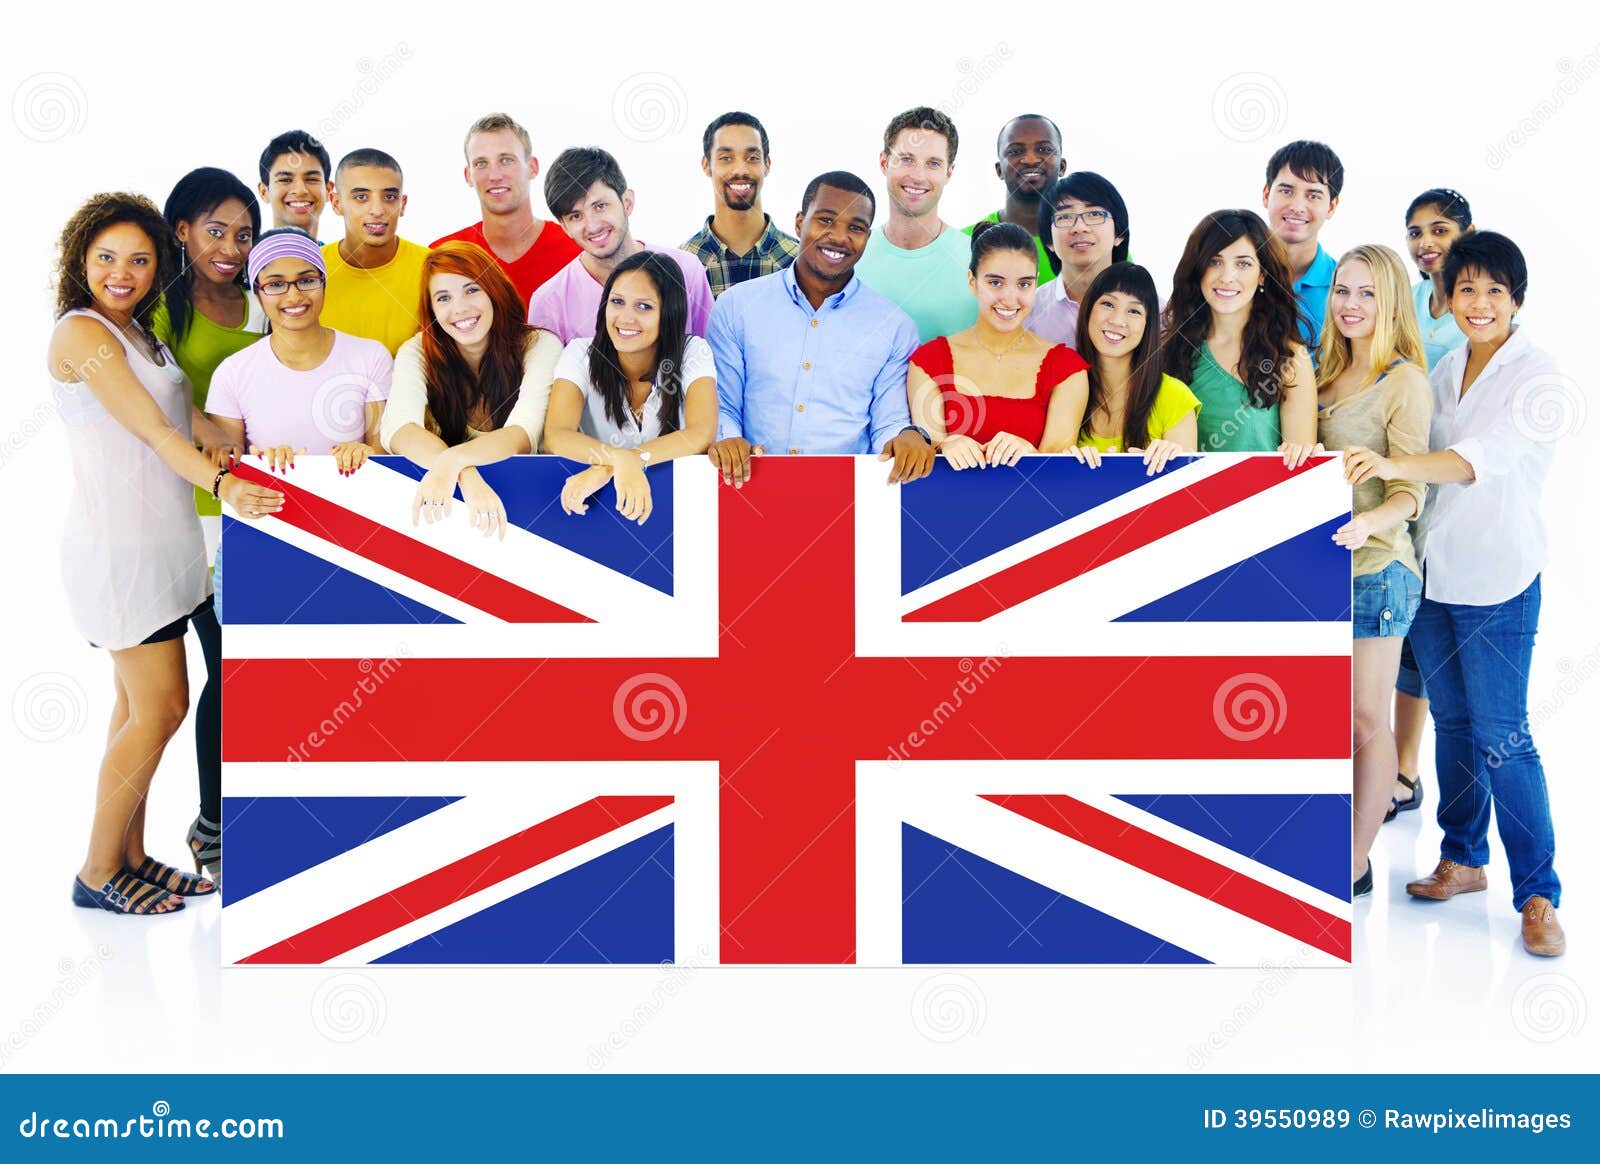 The United Kingdom And The People s